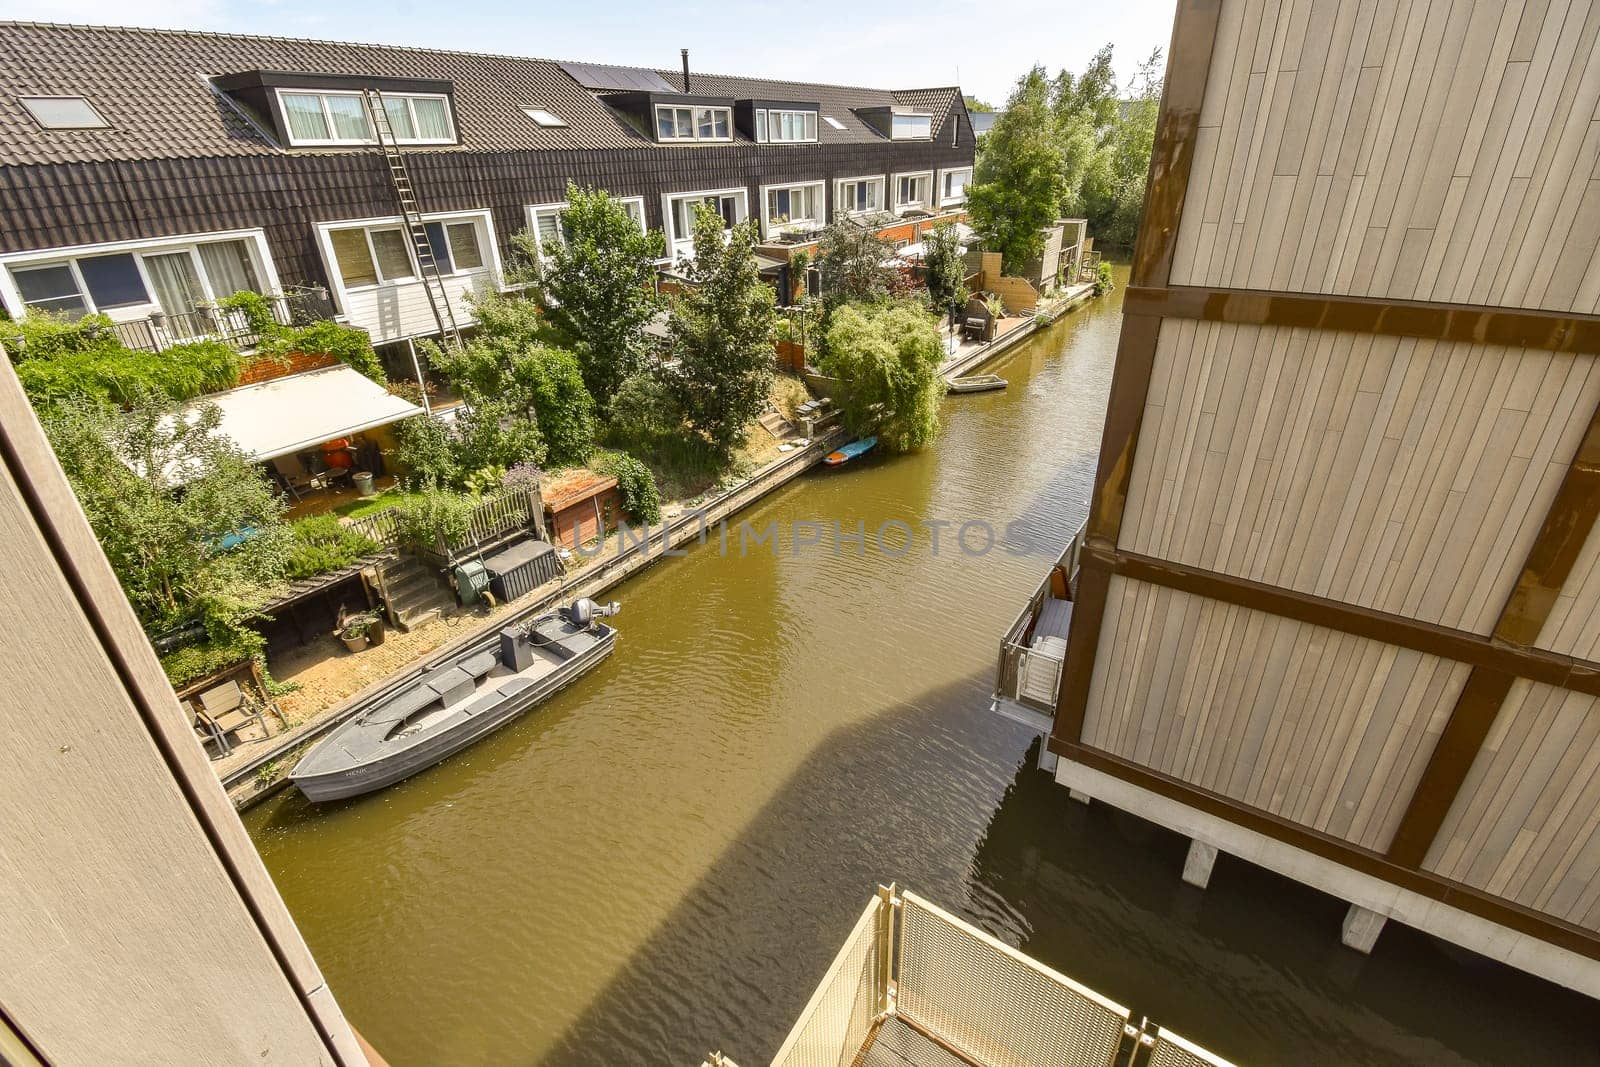 a canal with houses and a boat in it by casamedia